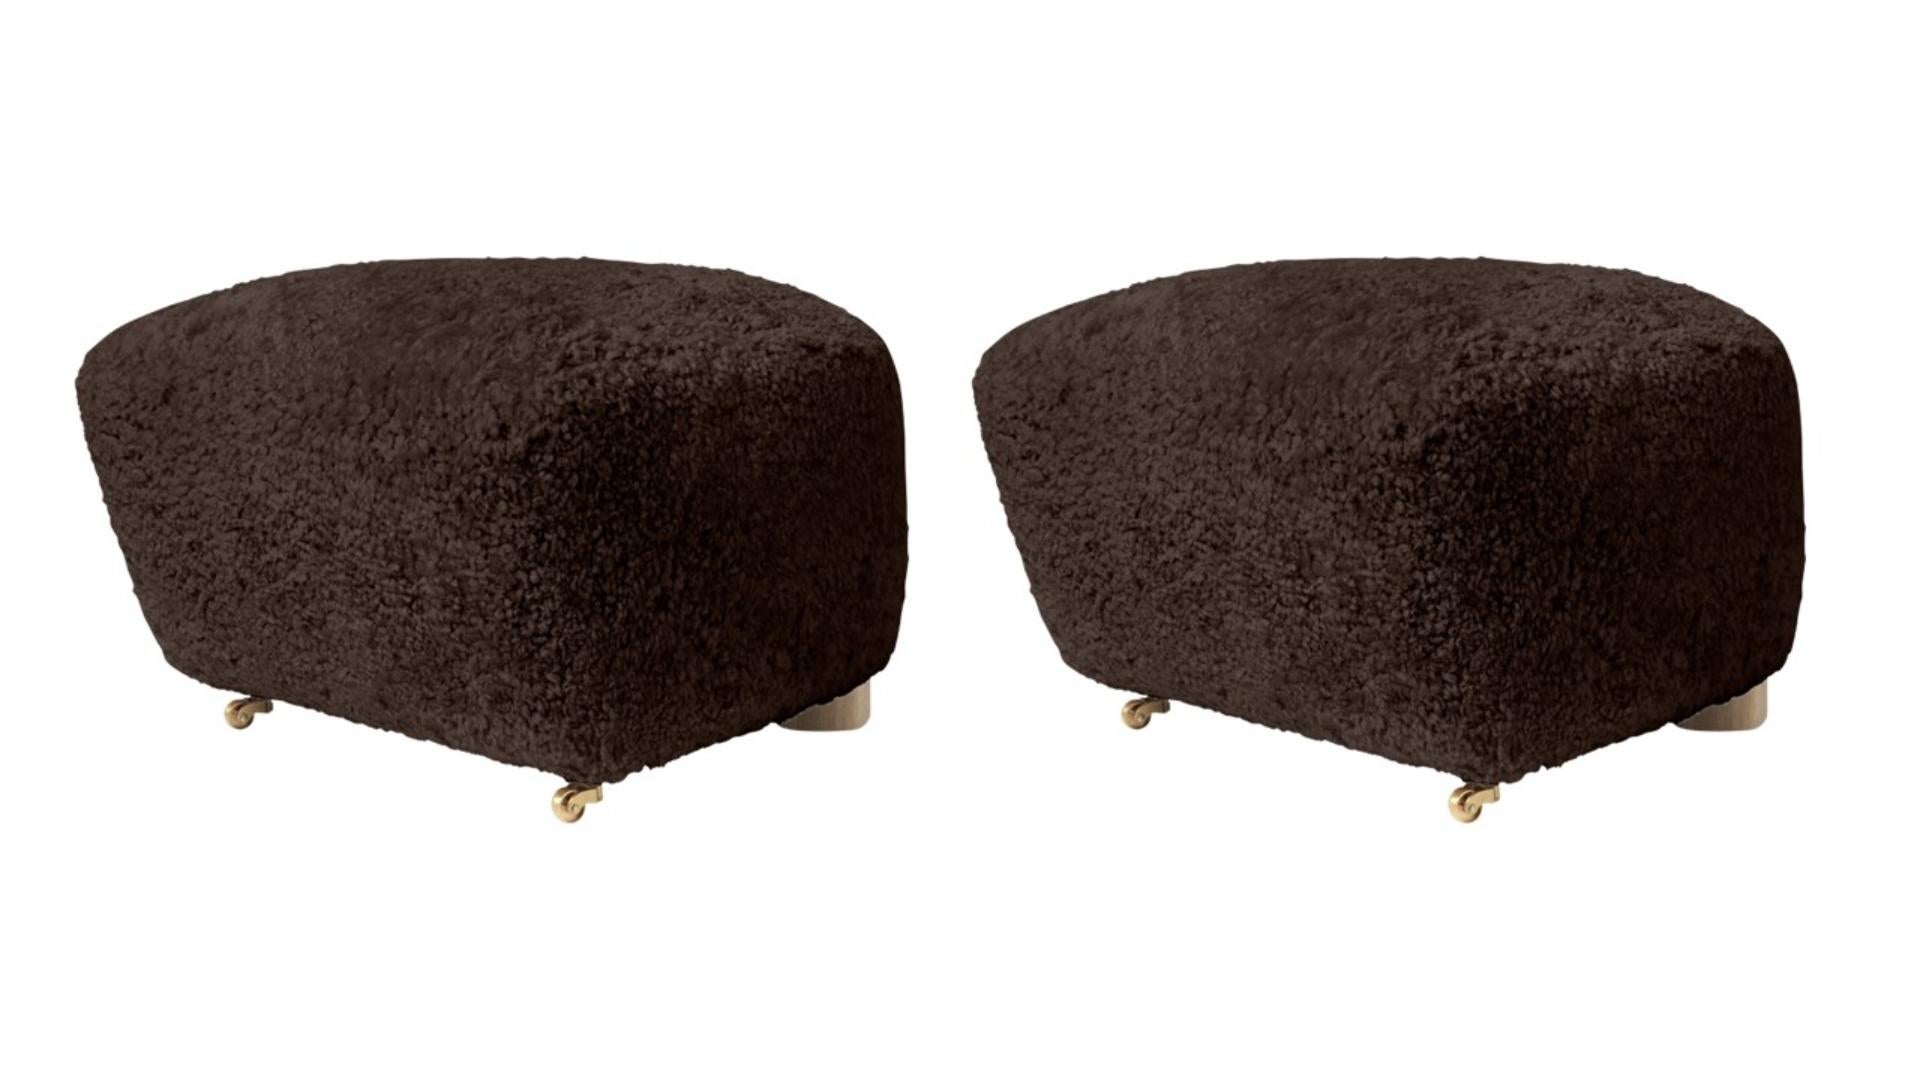 Set of 2 espresso natural oak sheepskin the tired man footstools by Lassen
Dimensions: W 55 x D 53 x H 36 cm 
Materials: Sheepskin

Flemming Lassen designed the overstuffed easy chair, The Tired Man, for The Copenhagen Cabinetmakers’ Guild